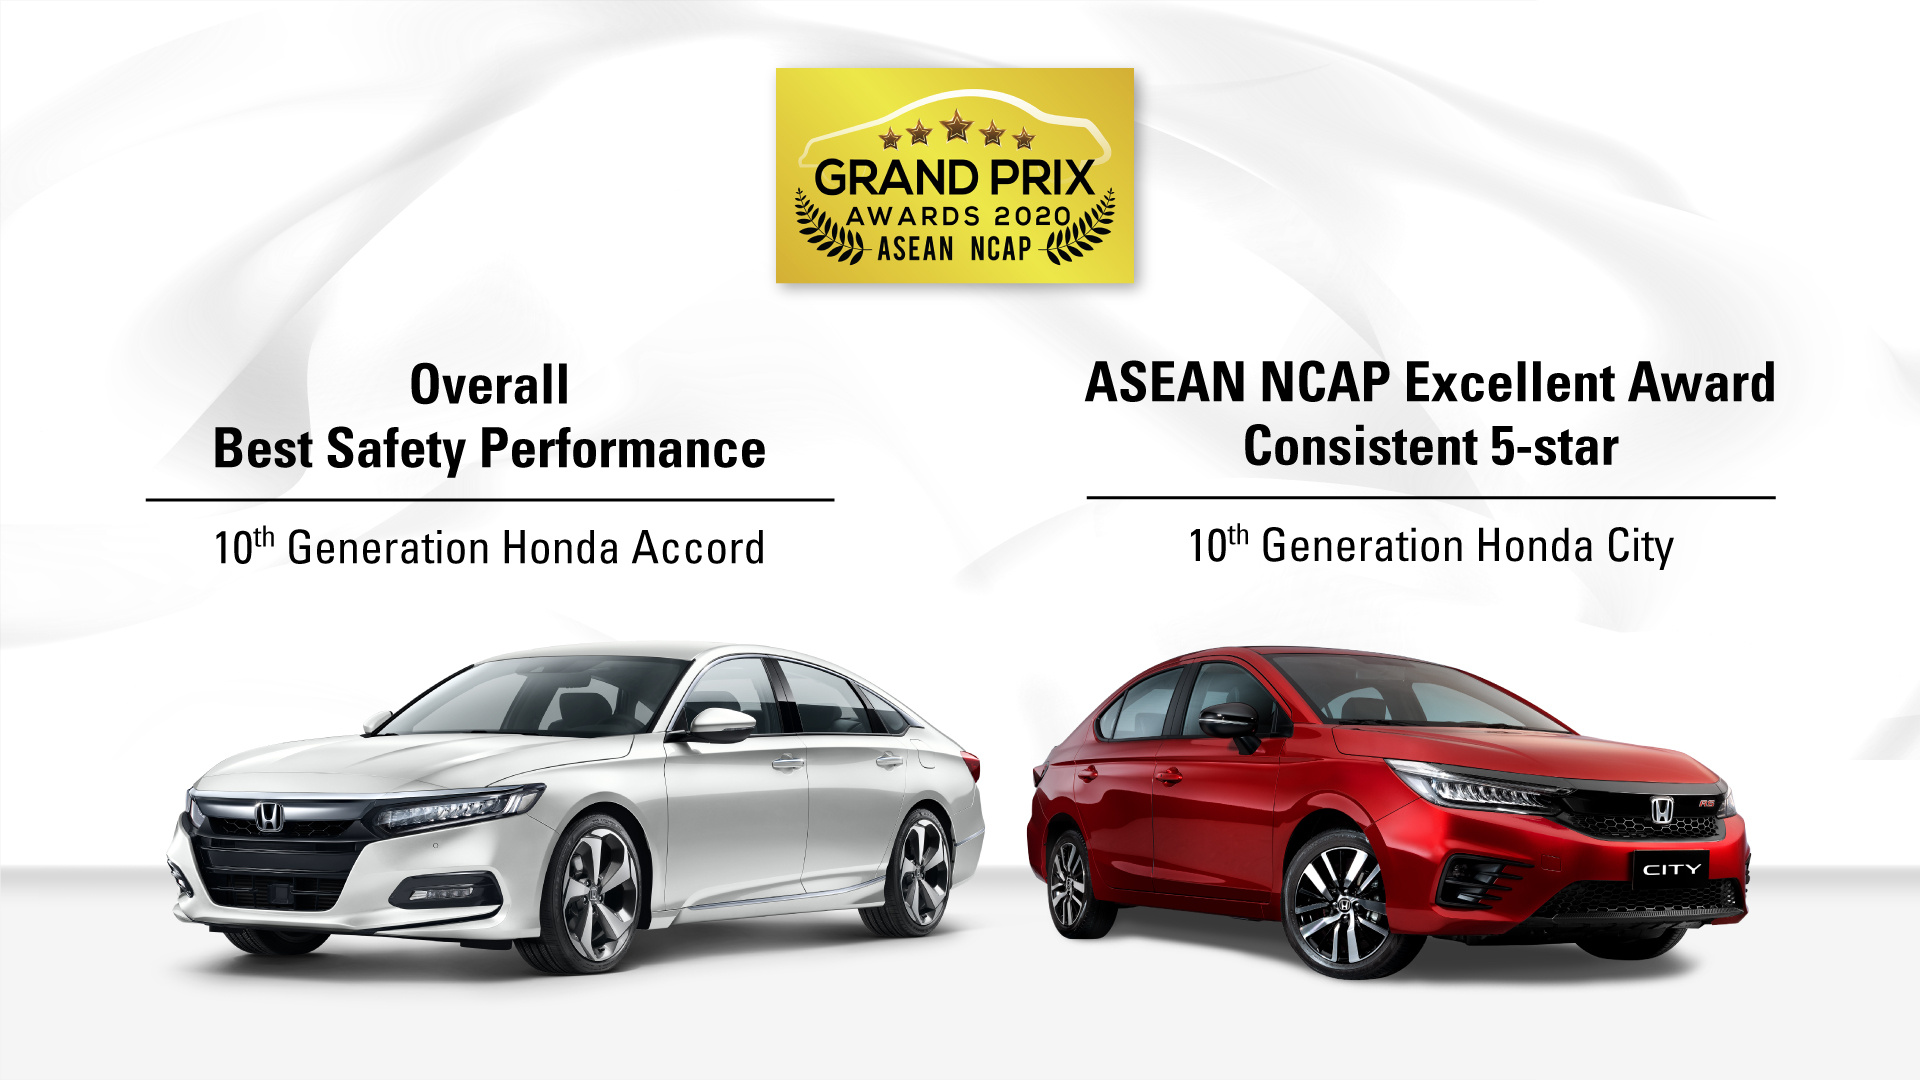 Grand Prix poster featuring the awards won by the Honda Accord and the Honda City 